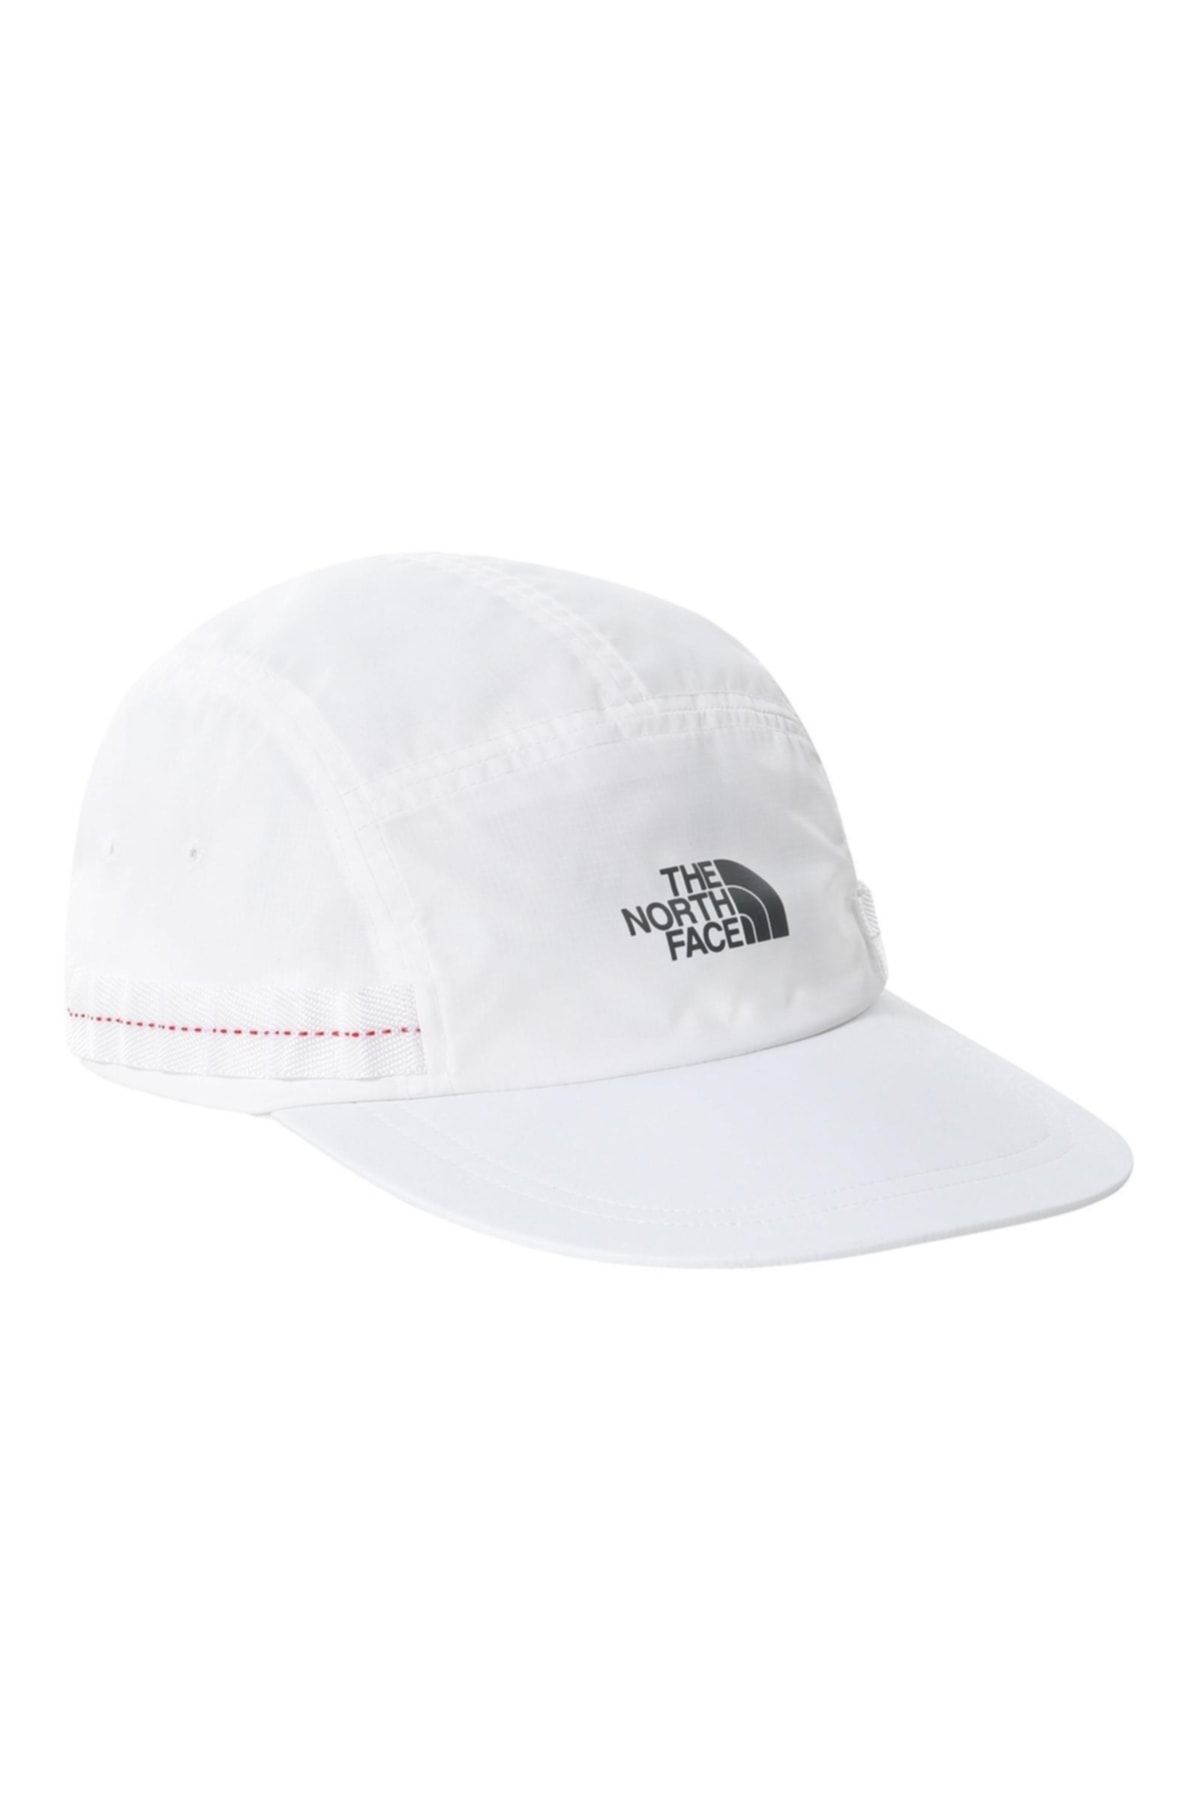 The North Face HAT UNISEX THE WETHER SUNSHIELD 5 NF0A5FXEKZ7